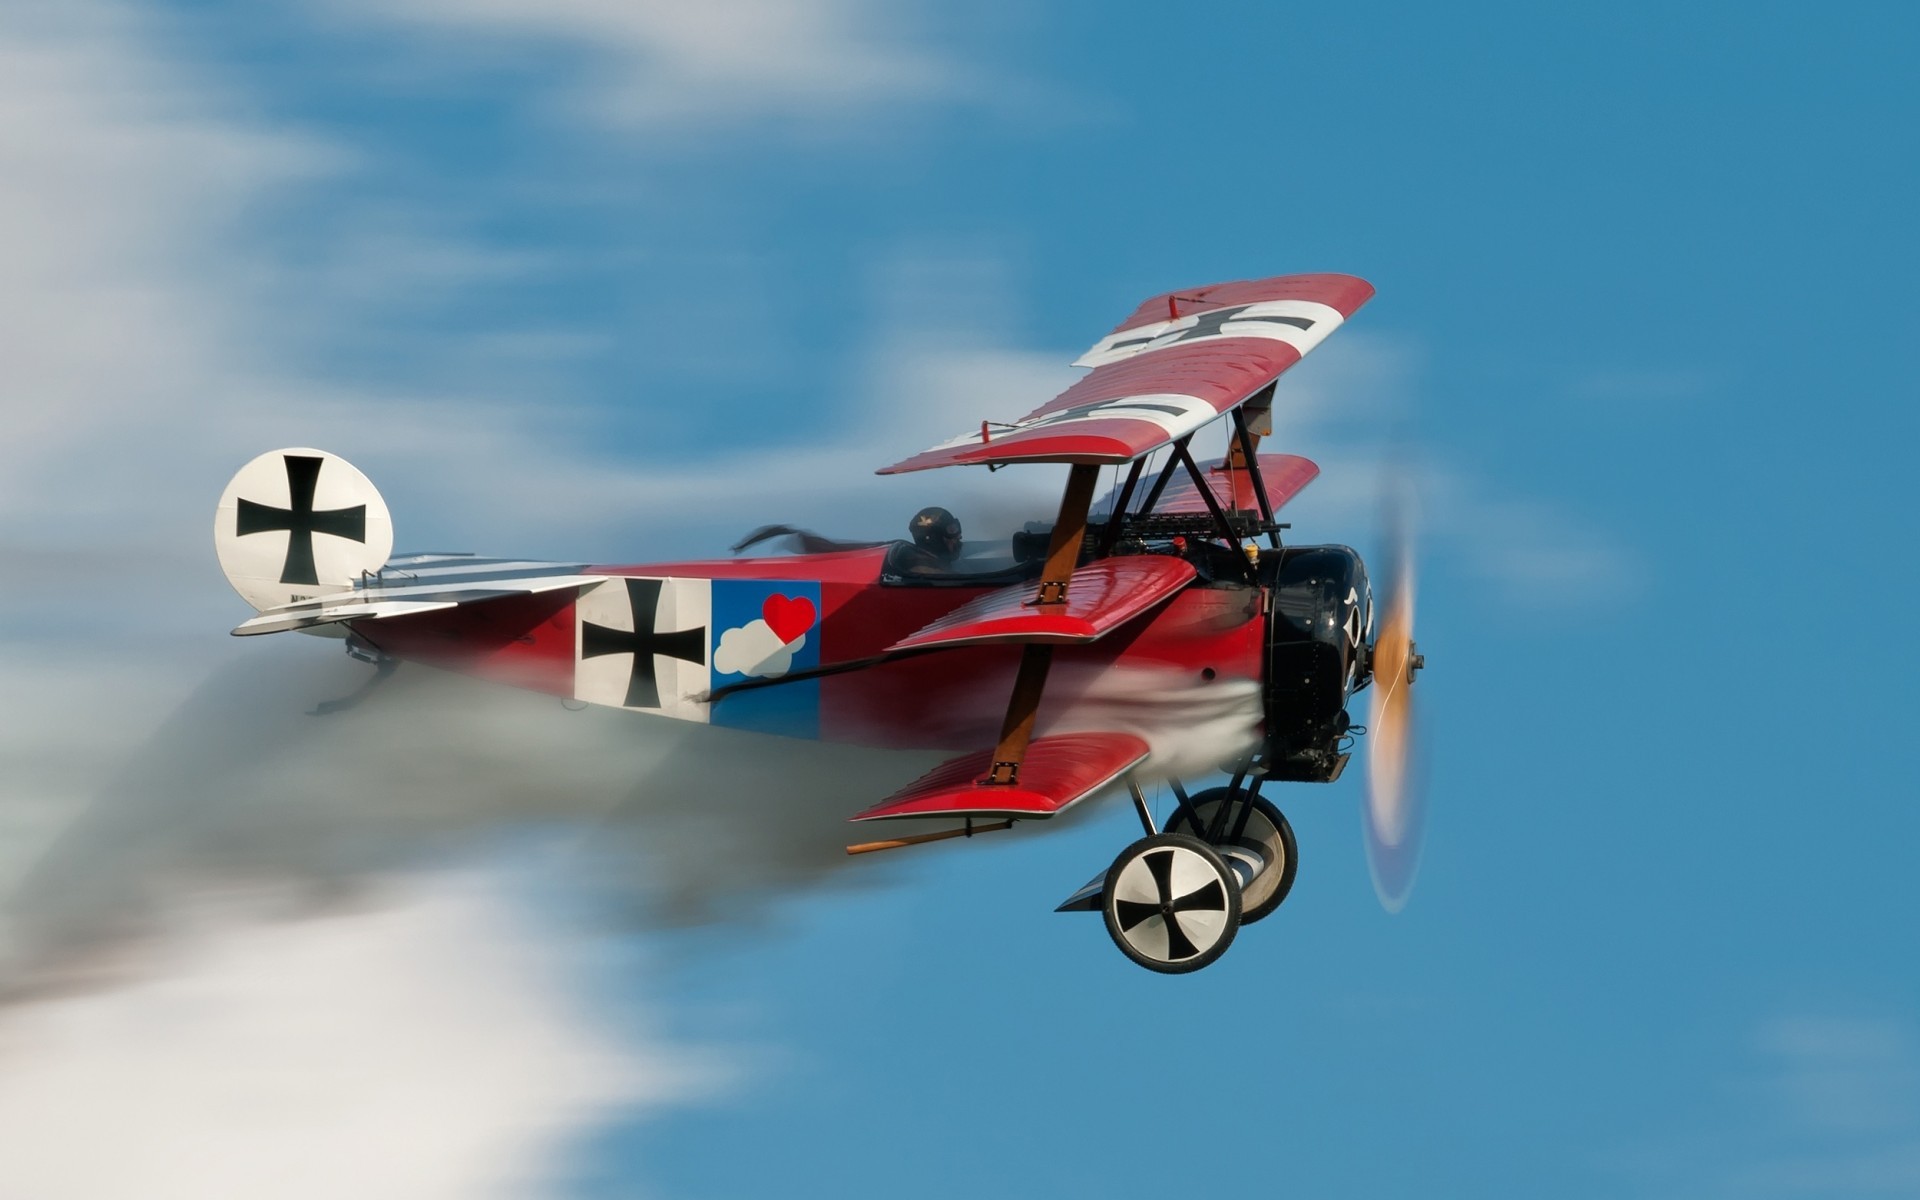 General 1920x1200 Fokker DR 1 vehicle aircraft military aircraft Dutch aircraft Fokker airplane pilot men smoke flying simple background minimalism motion blur